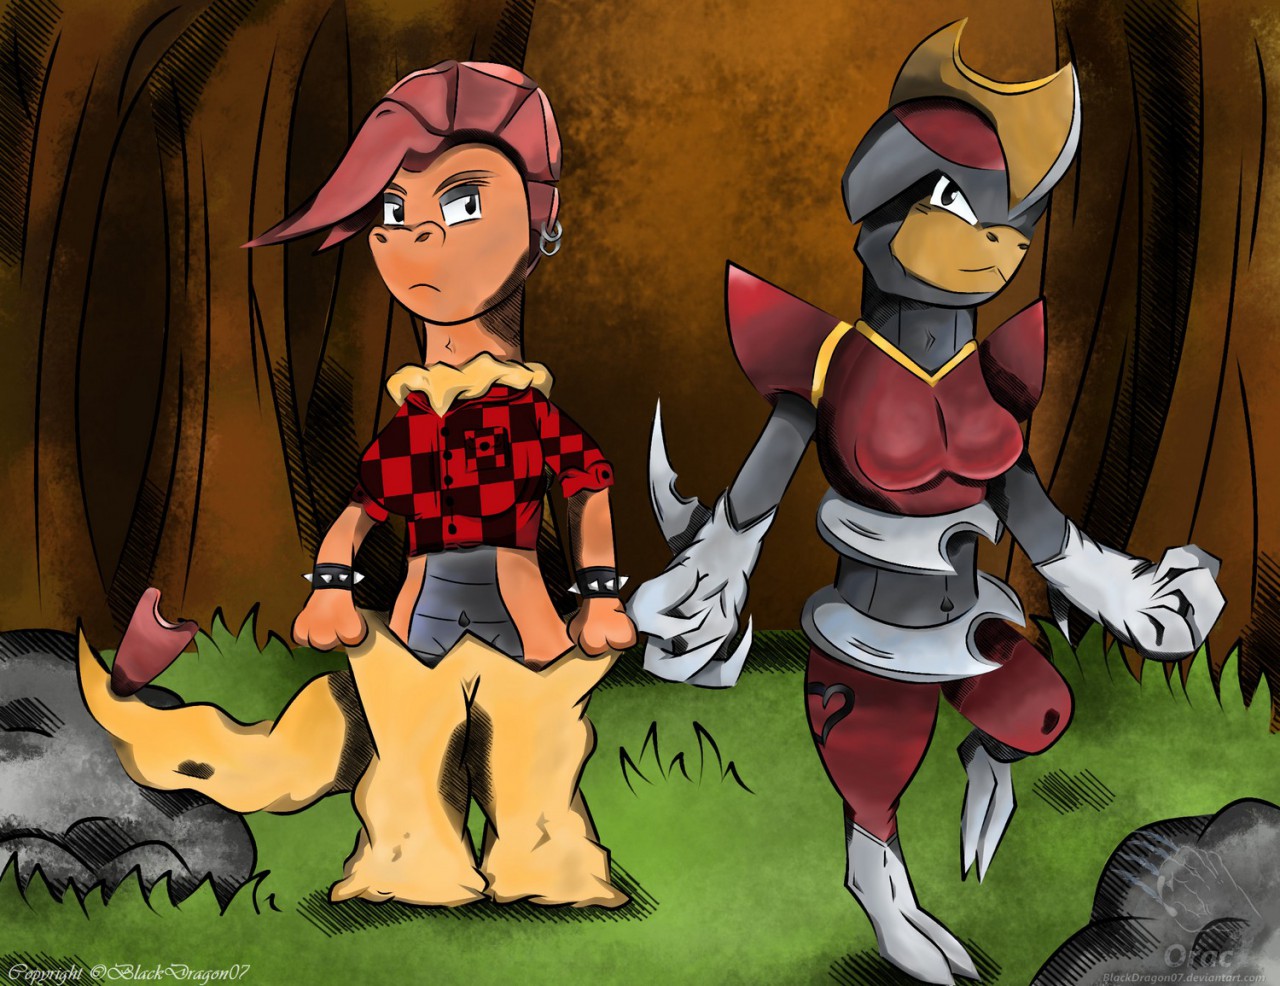 I drew Escavalier and Bisharp as Silver Chariot and Chariot